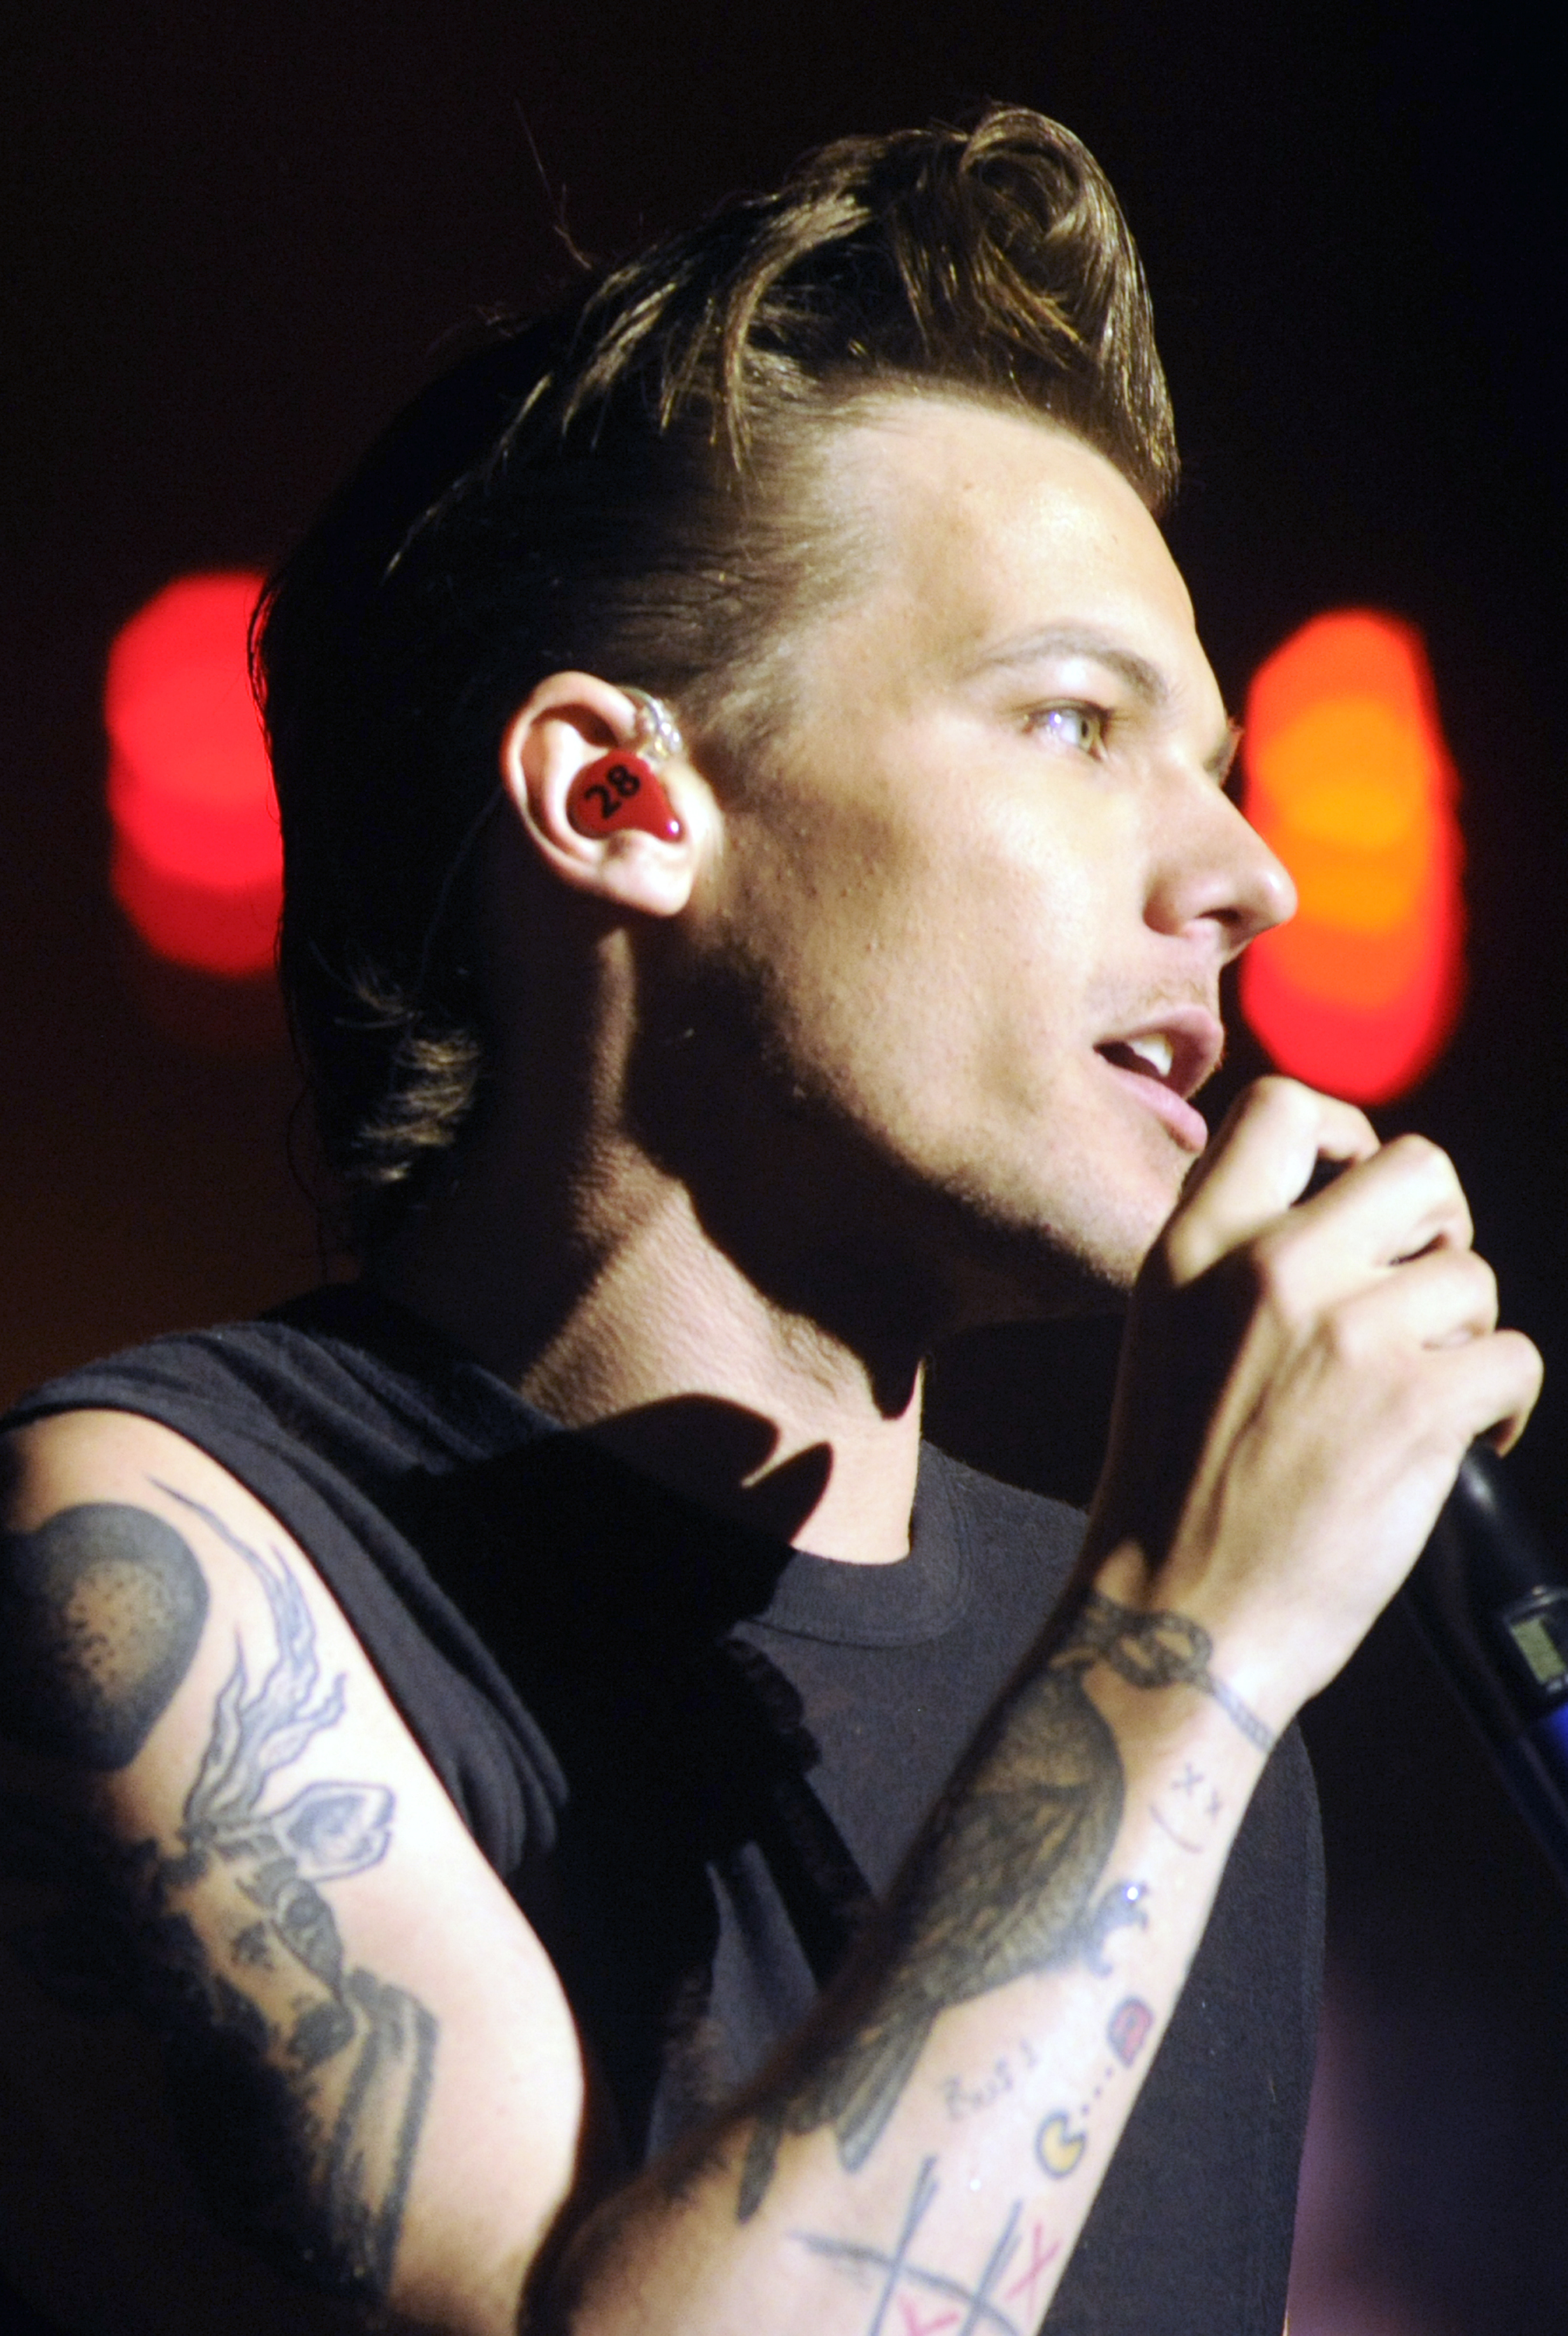 Louis Tomlinson of One Direction performs during the band's "On the Road Again" tour at Levi's Stadium on July 11, 2015 in Santa Clara, California.